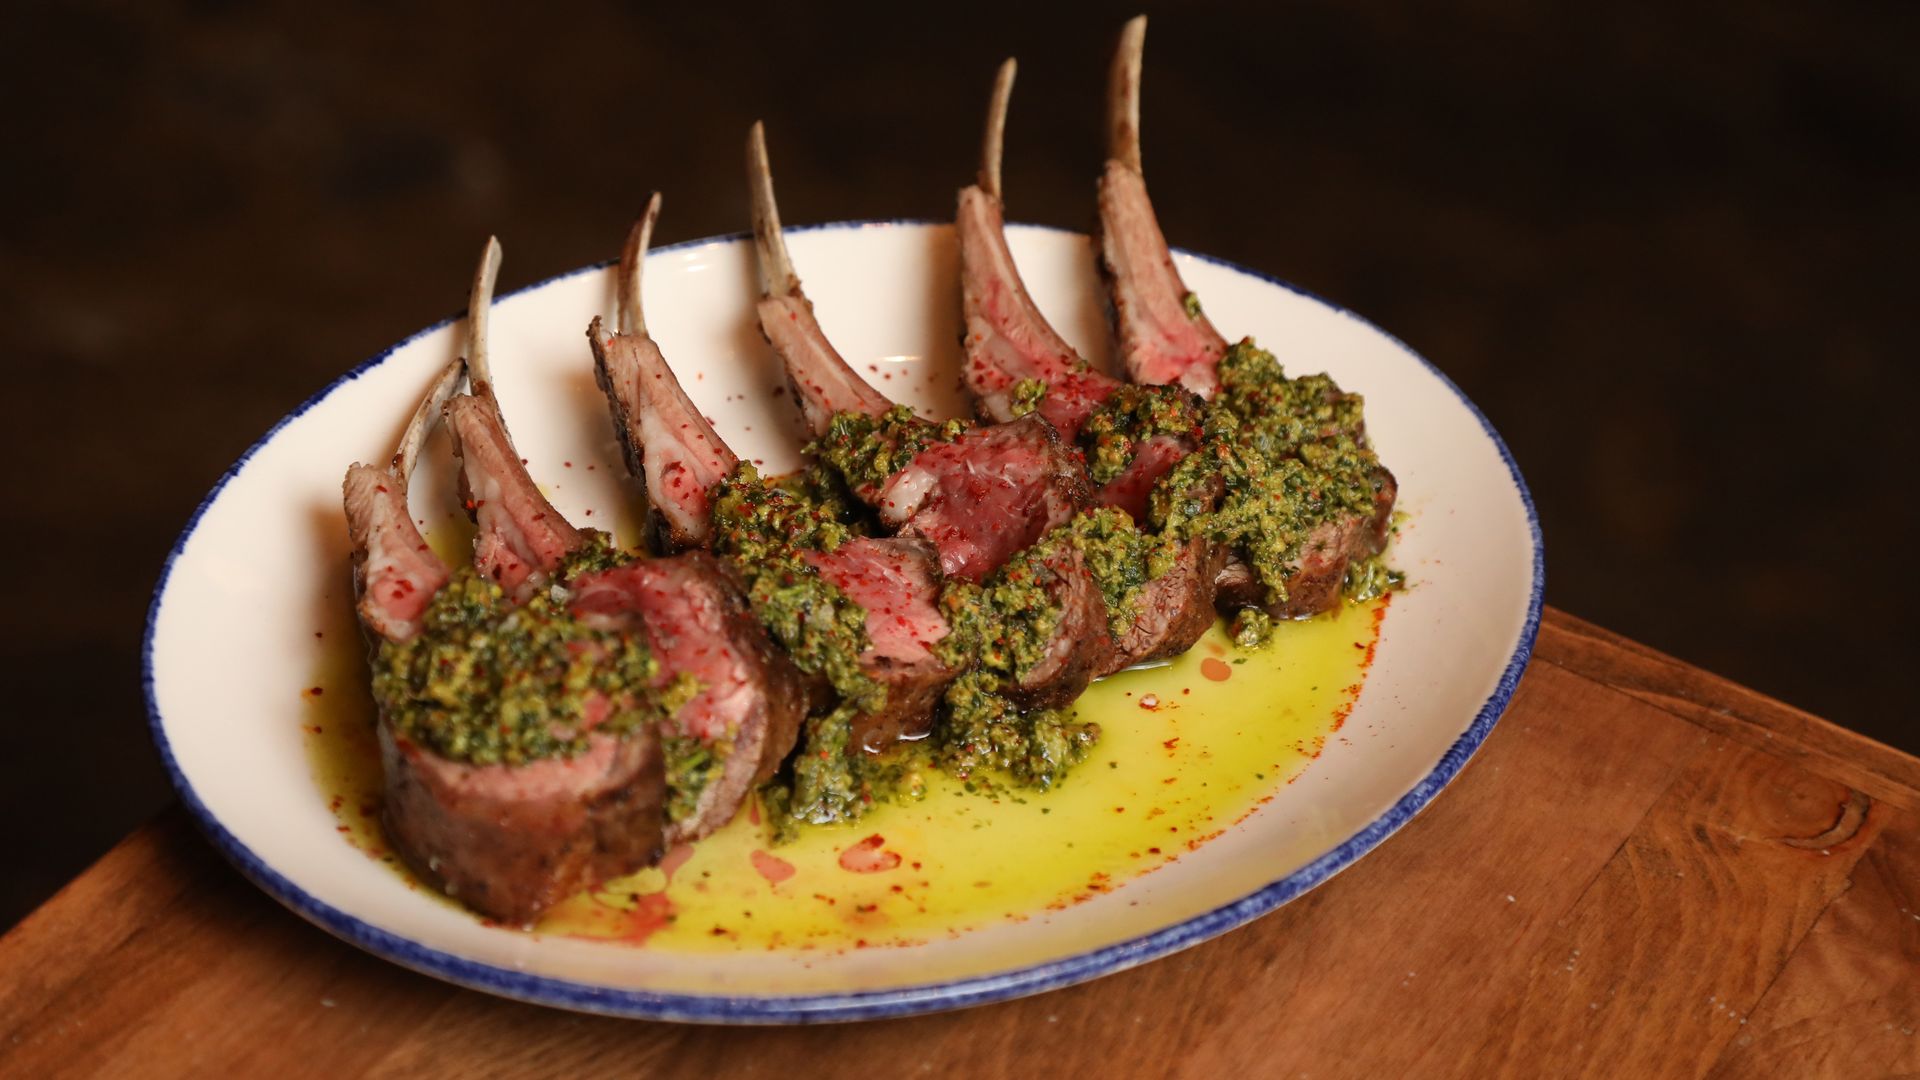 A white plate sits on a wooden table. On the plate is a rare rack of lamb covered with a green sauce. 